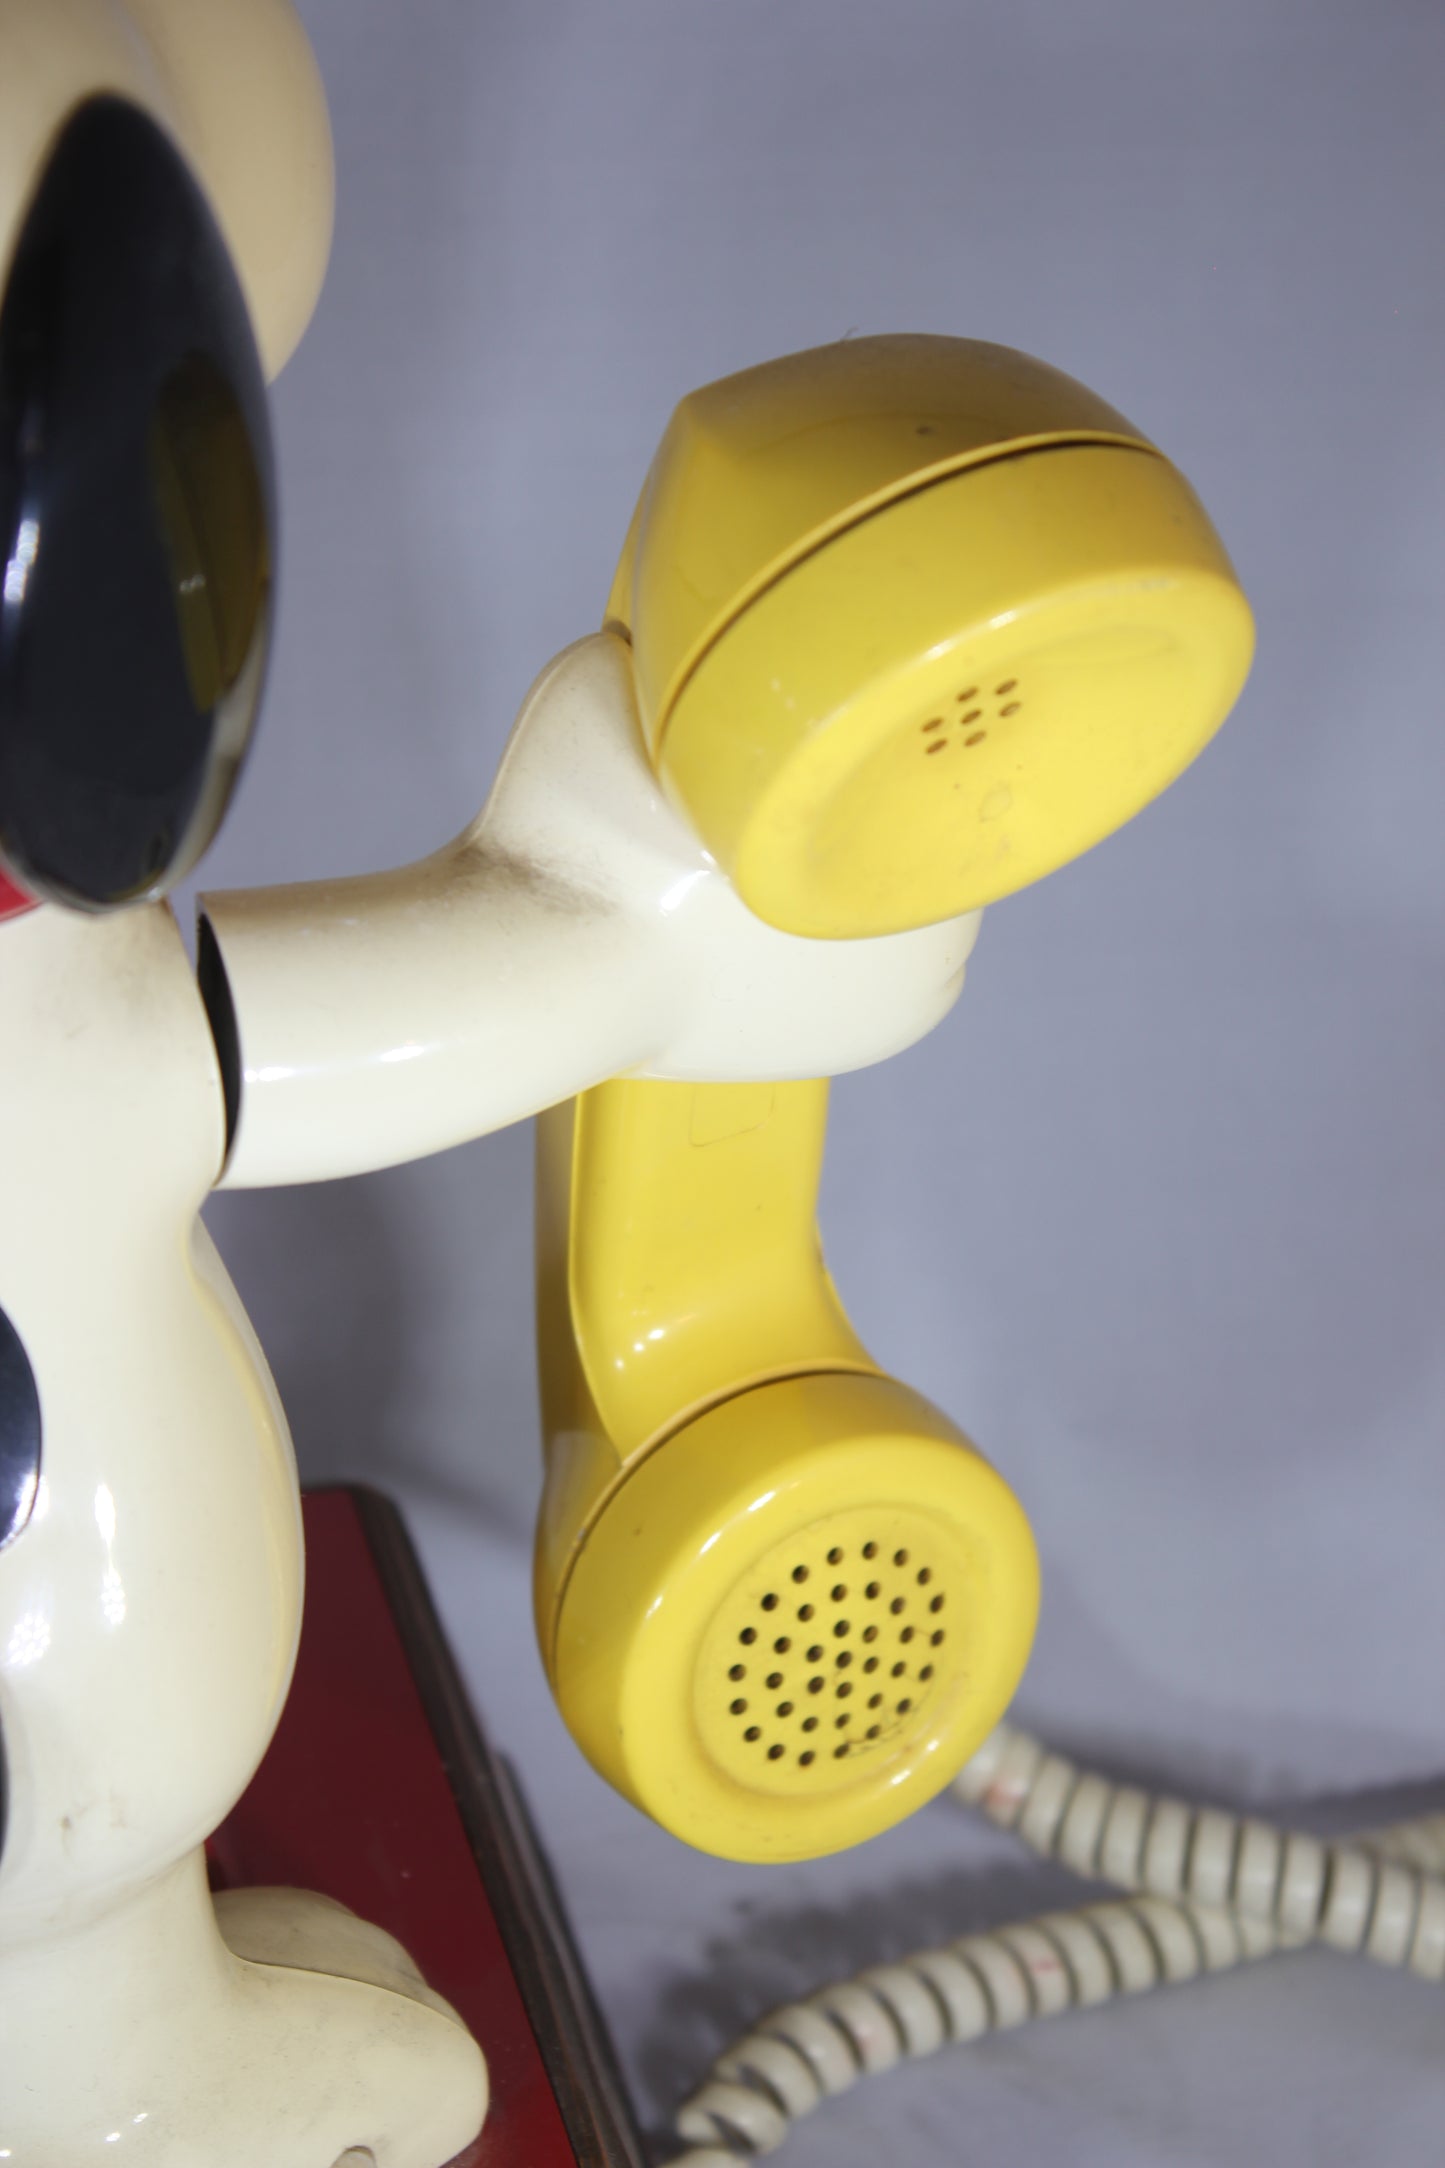 Peanuts Snoopy and Woodstock Vintage Rotary Dial Phone, 1966